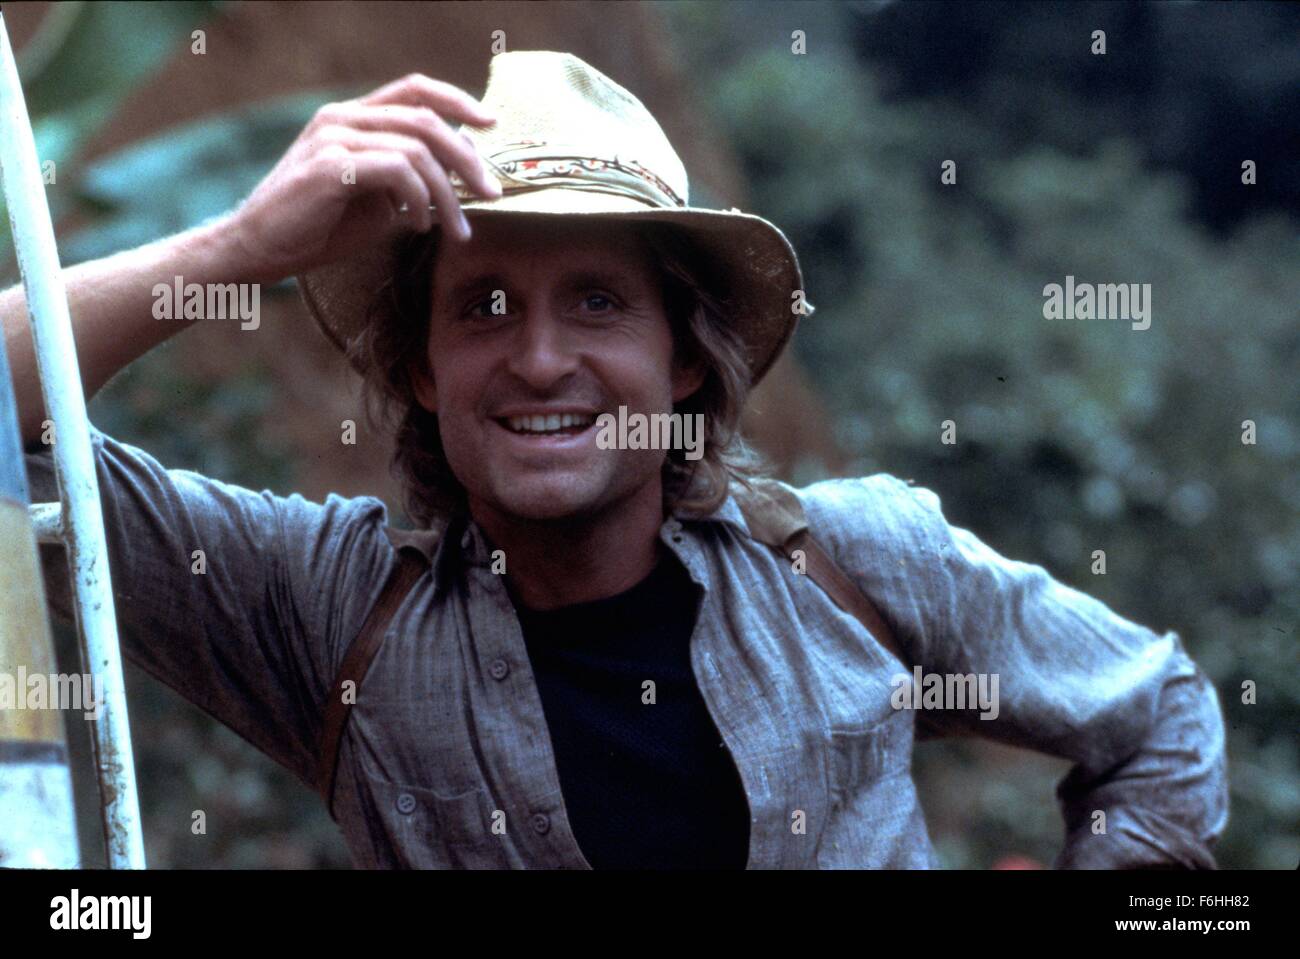 RELEASE DATE: March 30, 1984  MOVIE TITLE: Romancing the Stone  DIRECTOR: Robert Zemeckis  STUDIO: 20th Century Fox  PLOT: A romance writer sets off to Colombia to ransom her kidnapped sister, and soon finds herself in the middle of a dangerous adventure  PICTURED: MICHAEL DOUGLAS as Jack Colton  (Credit Image: c 20th Century Fox/Entertainment Pictures) Stock Photo